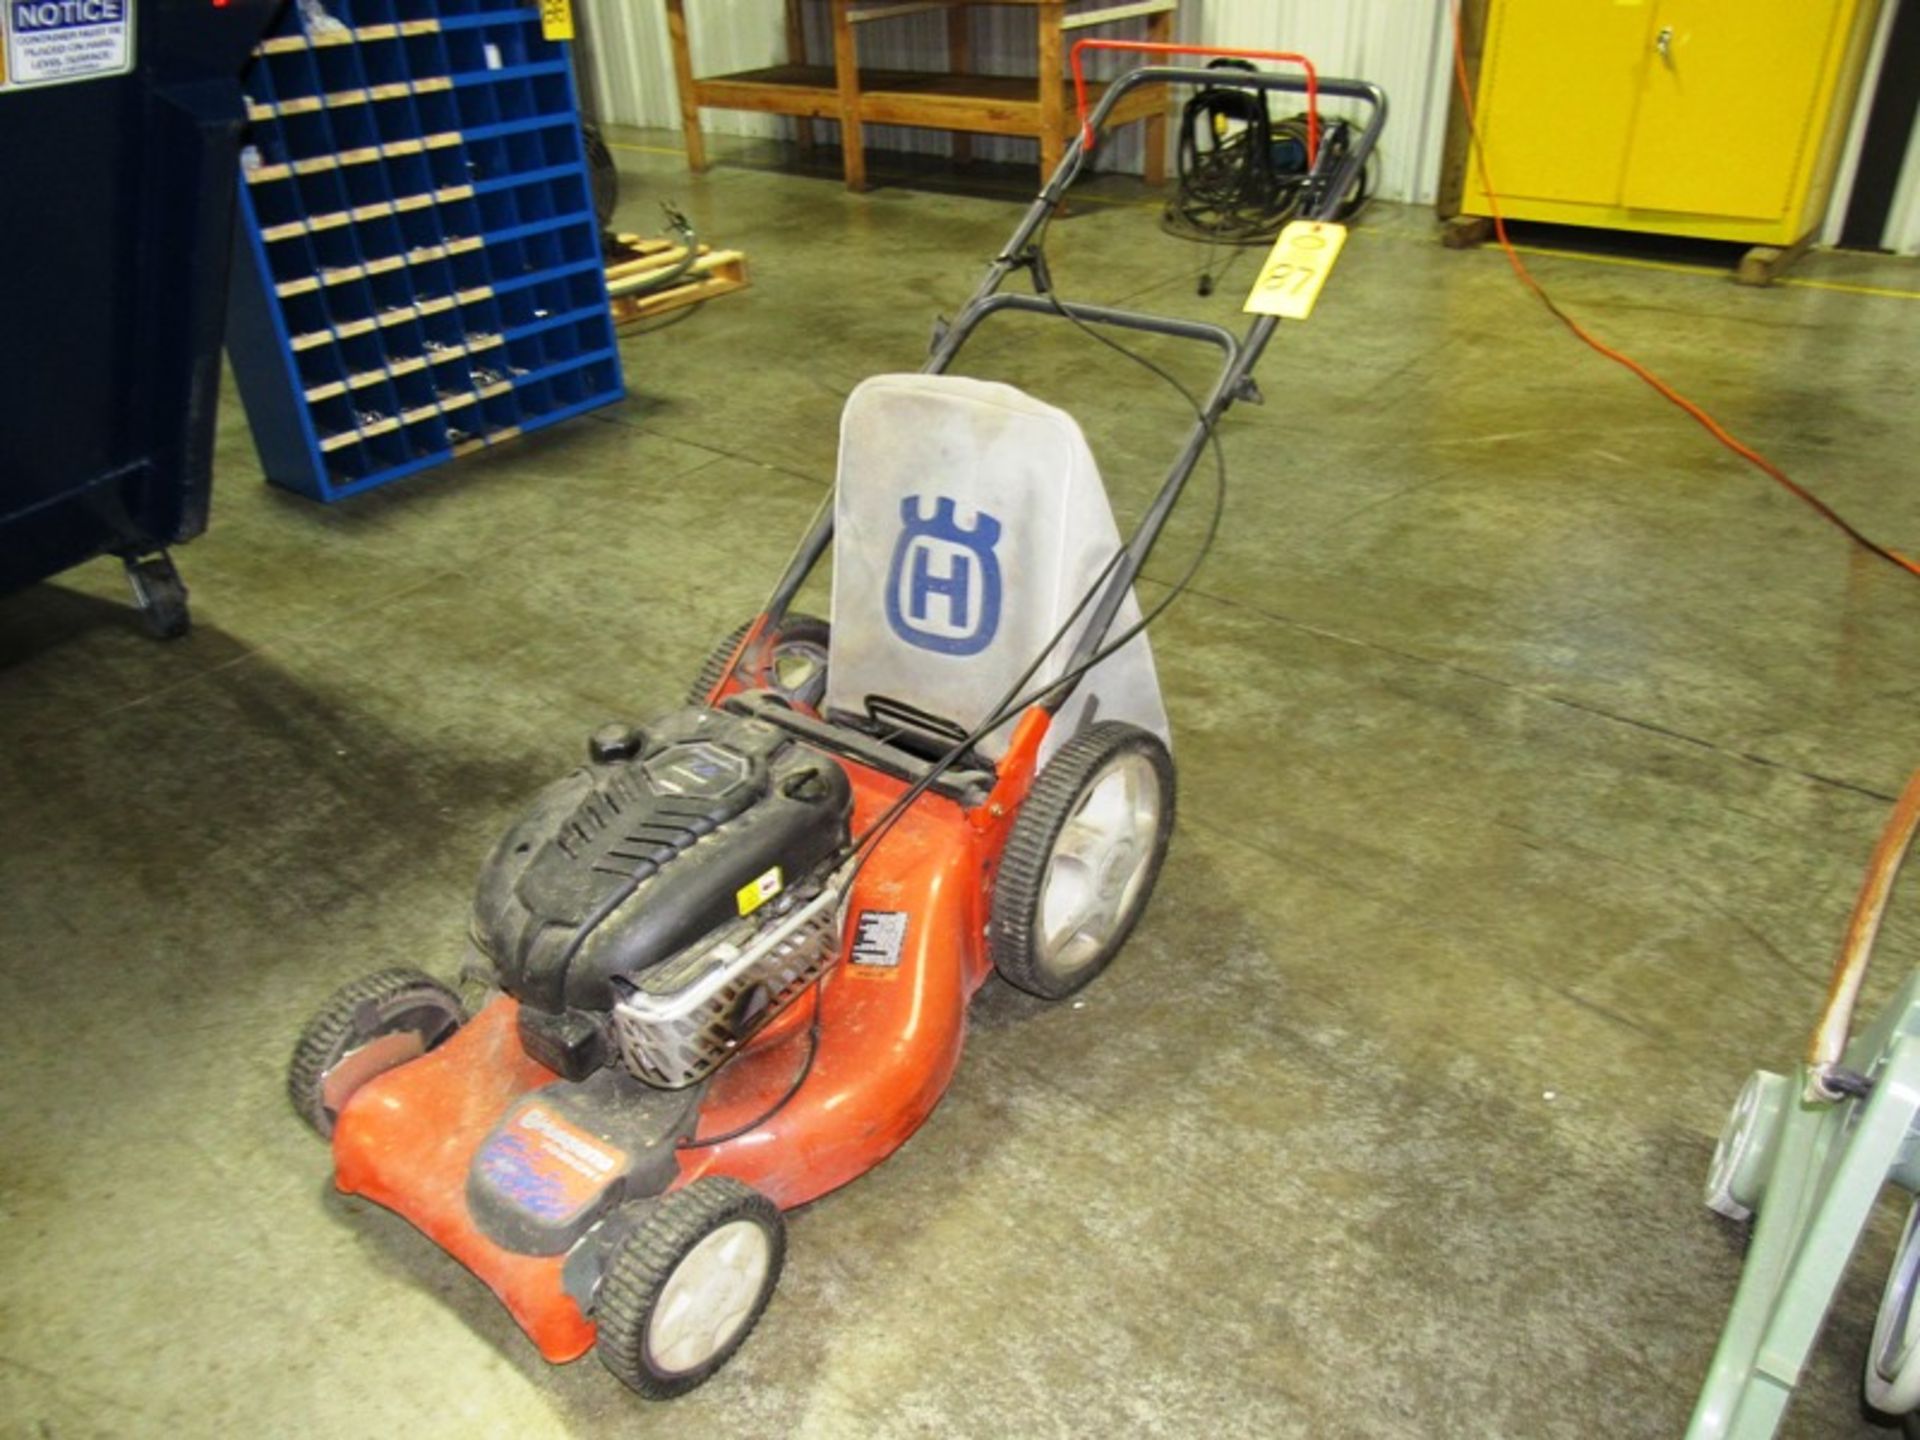 Husqvarna Mdl. 7021 CHI Lawn Mower, 21" wide with bagger, self propelled (Removal Begins July 5th)